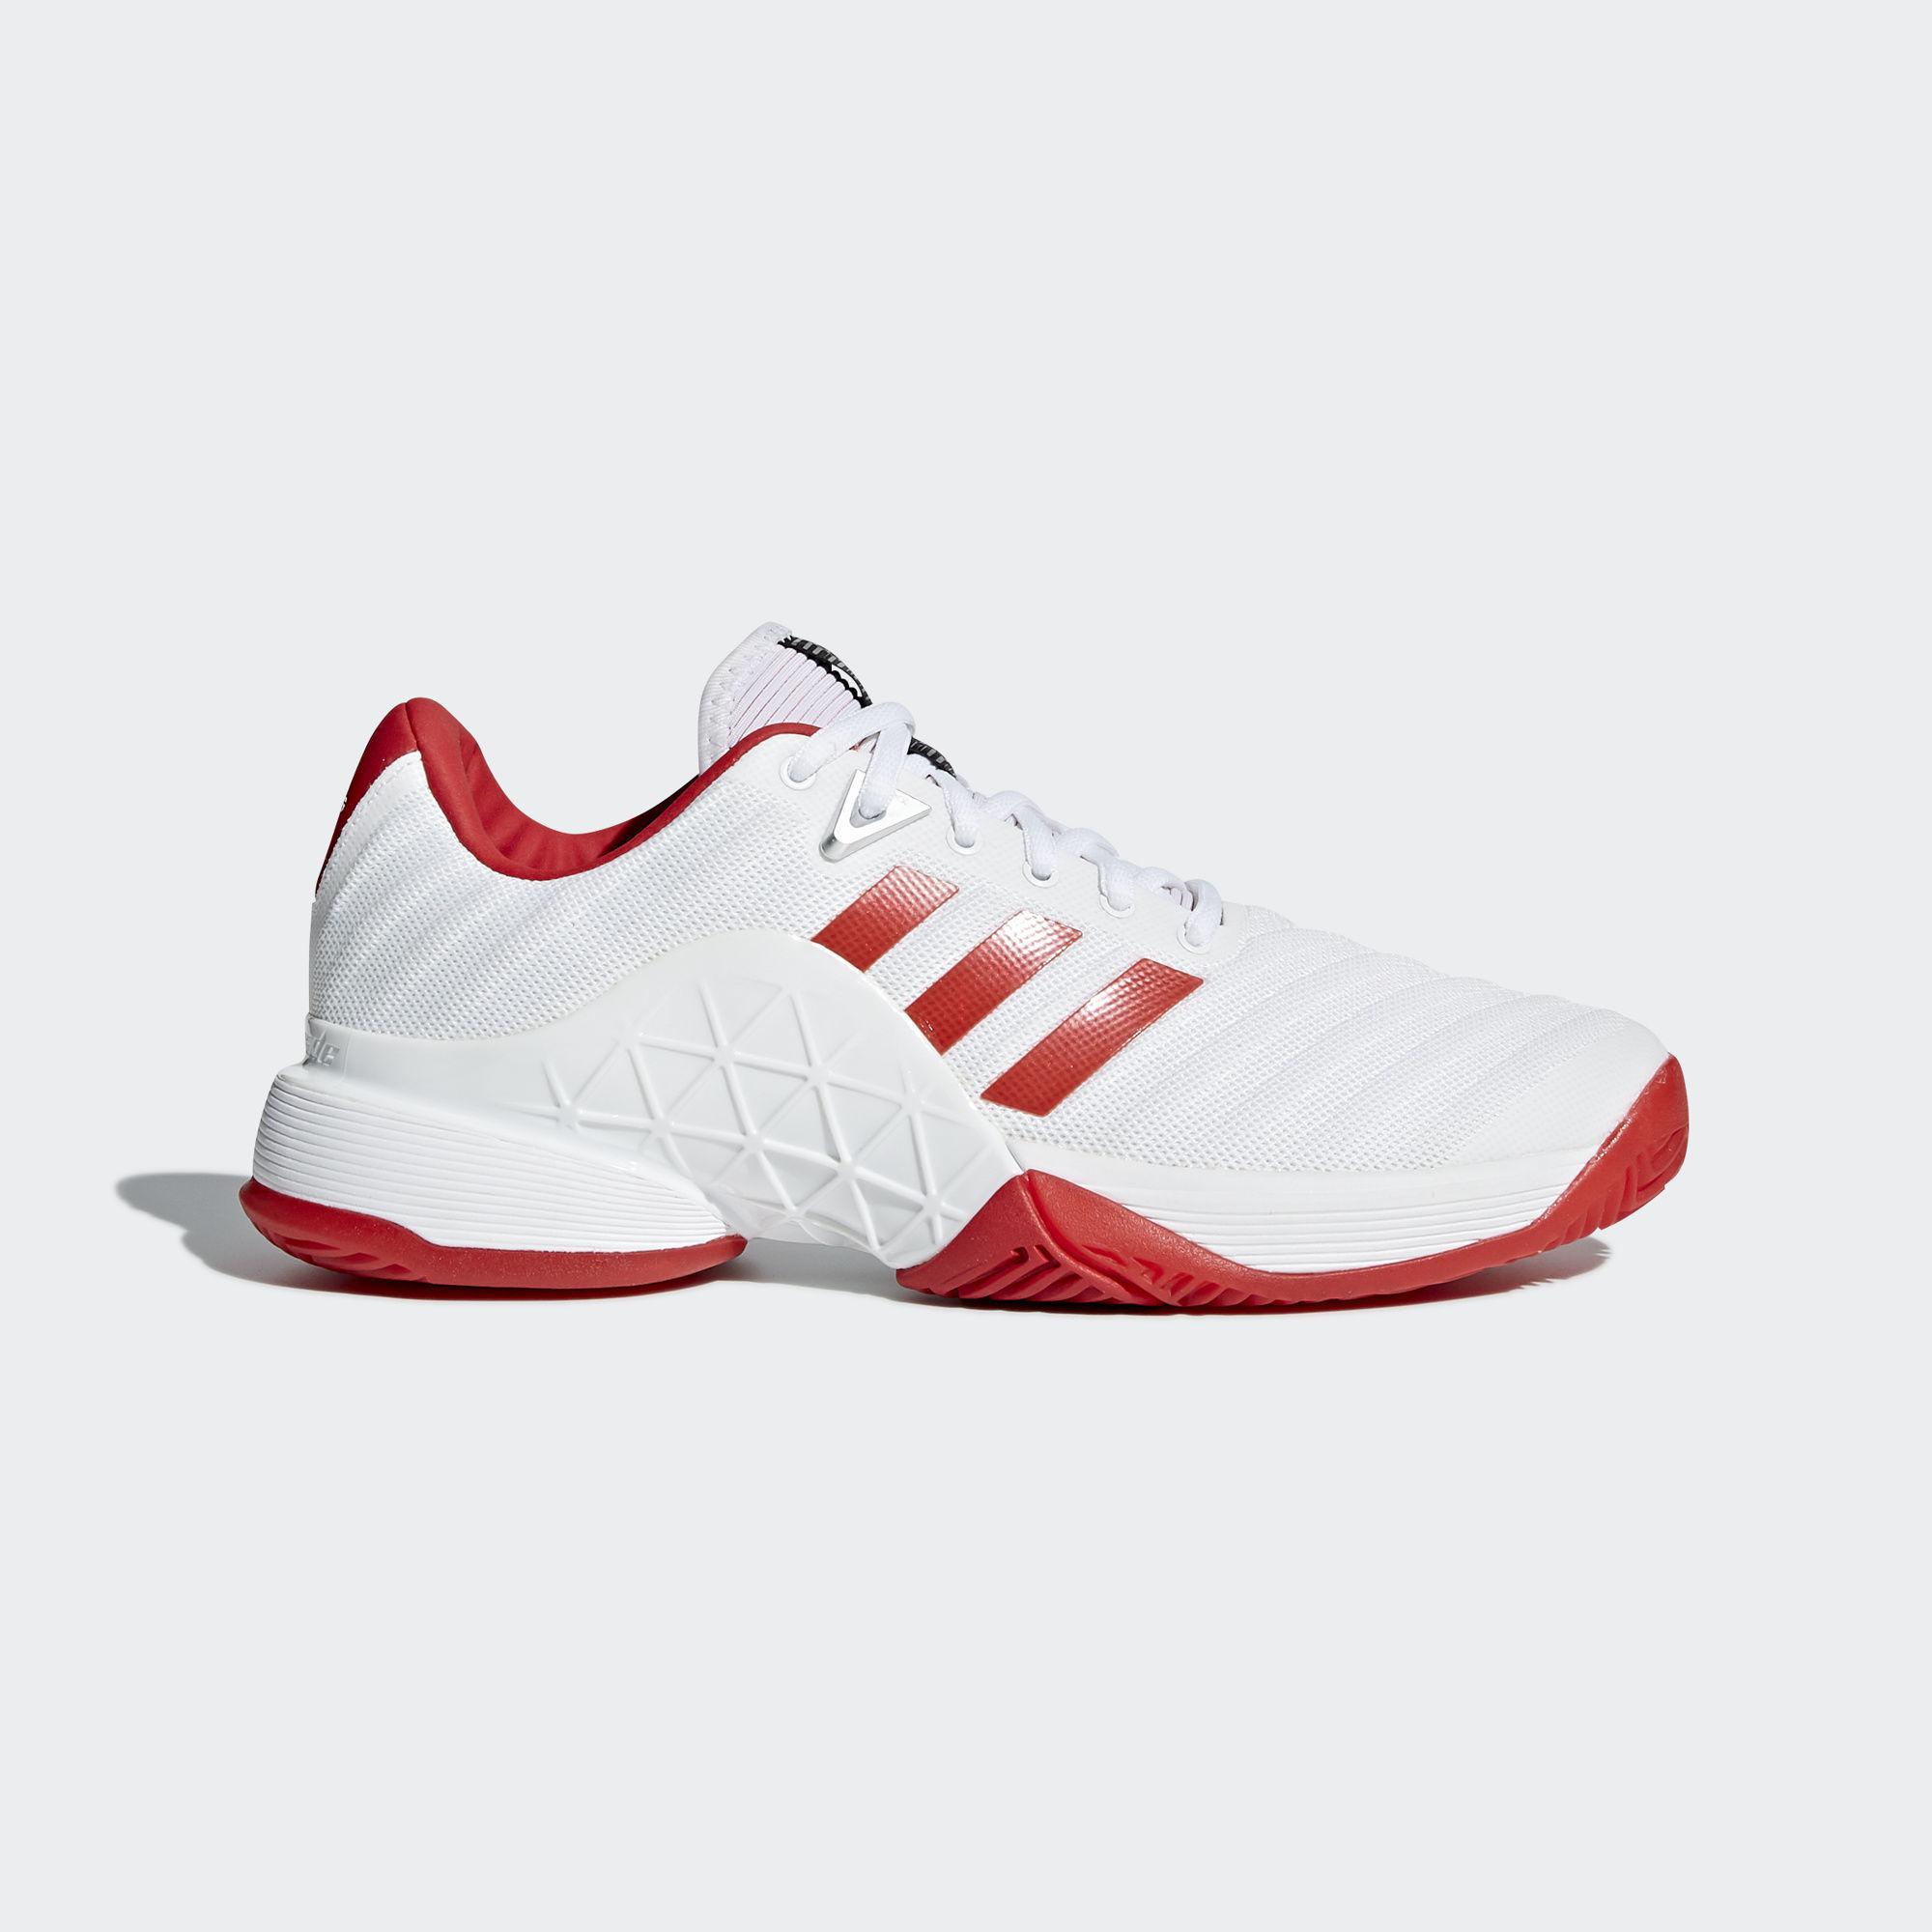 womens red tennis shoes adidas